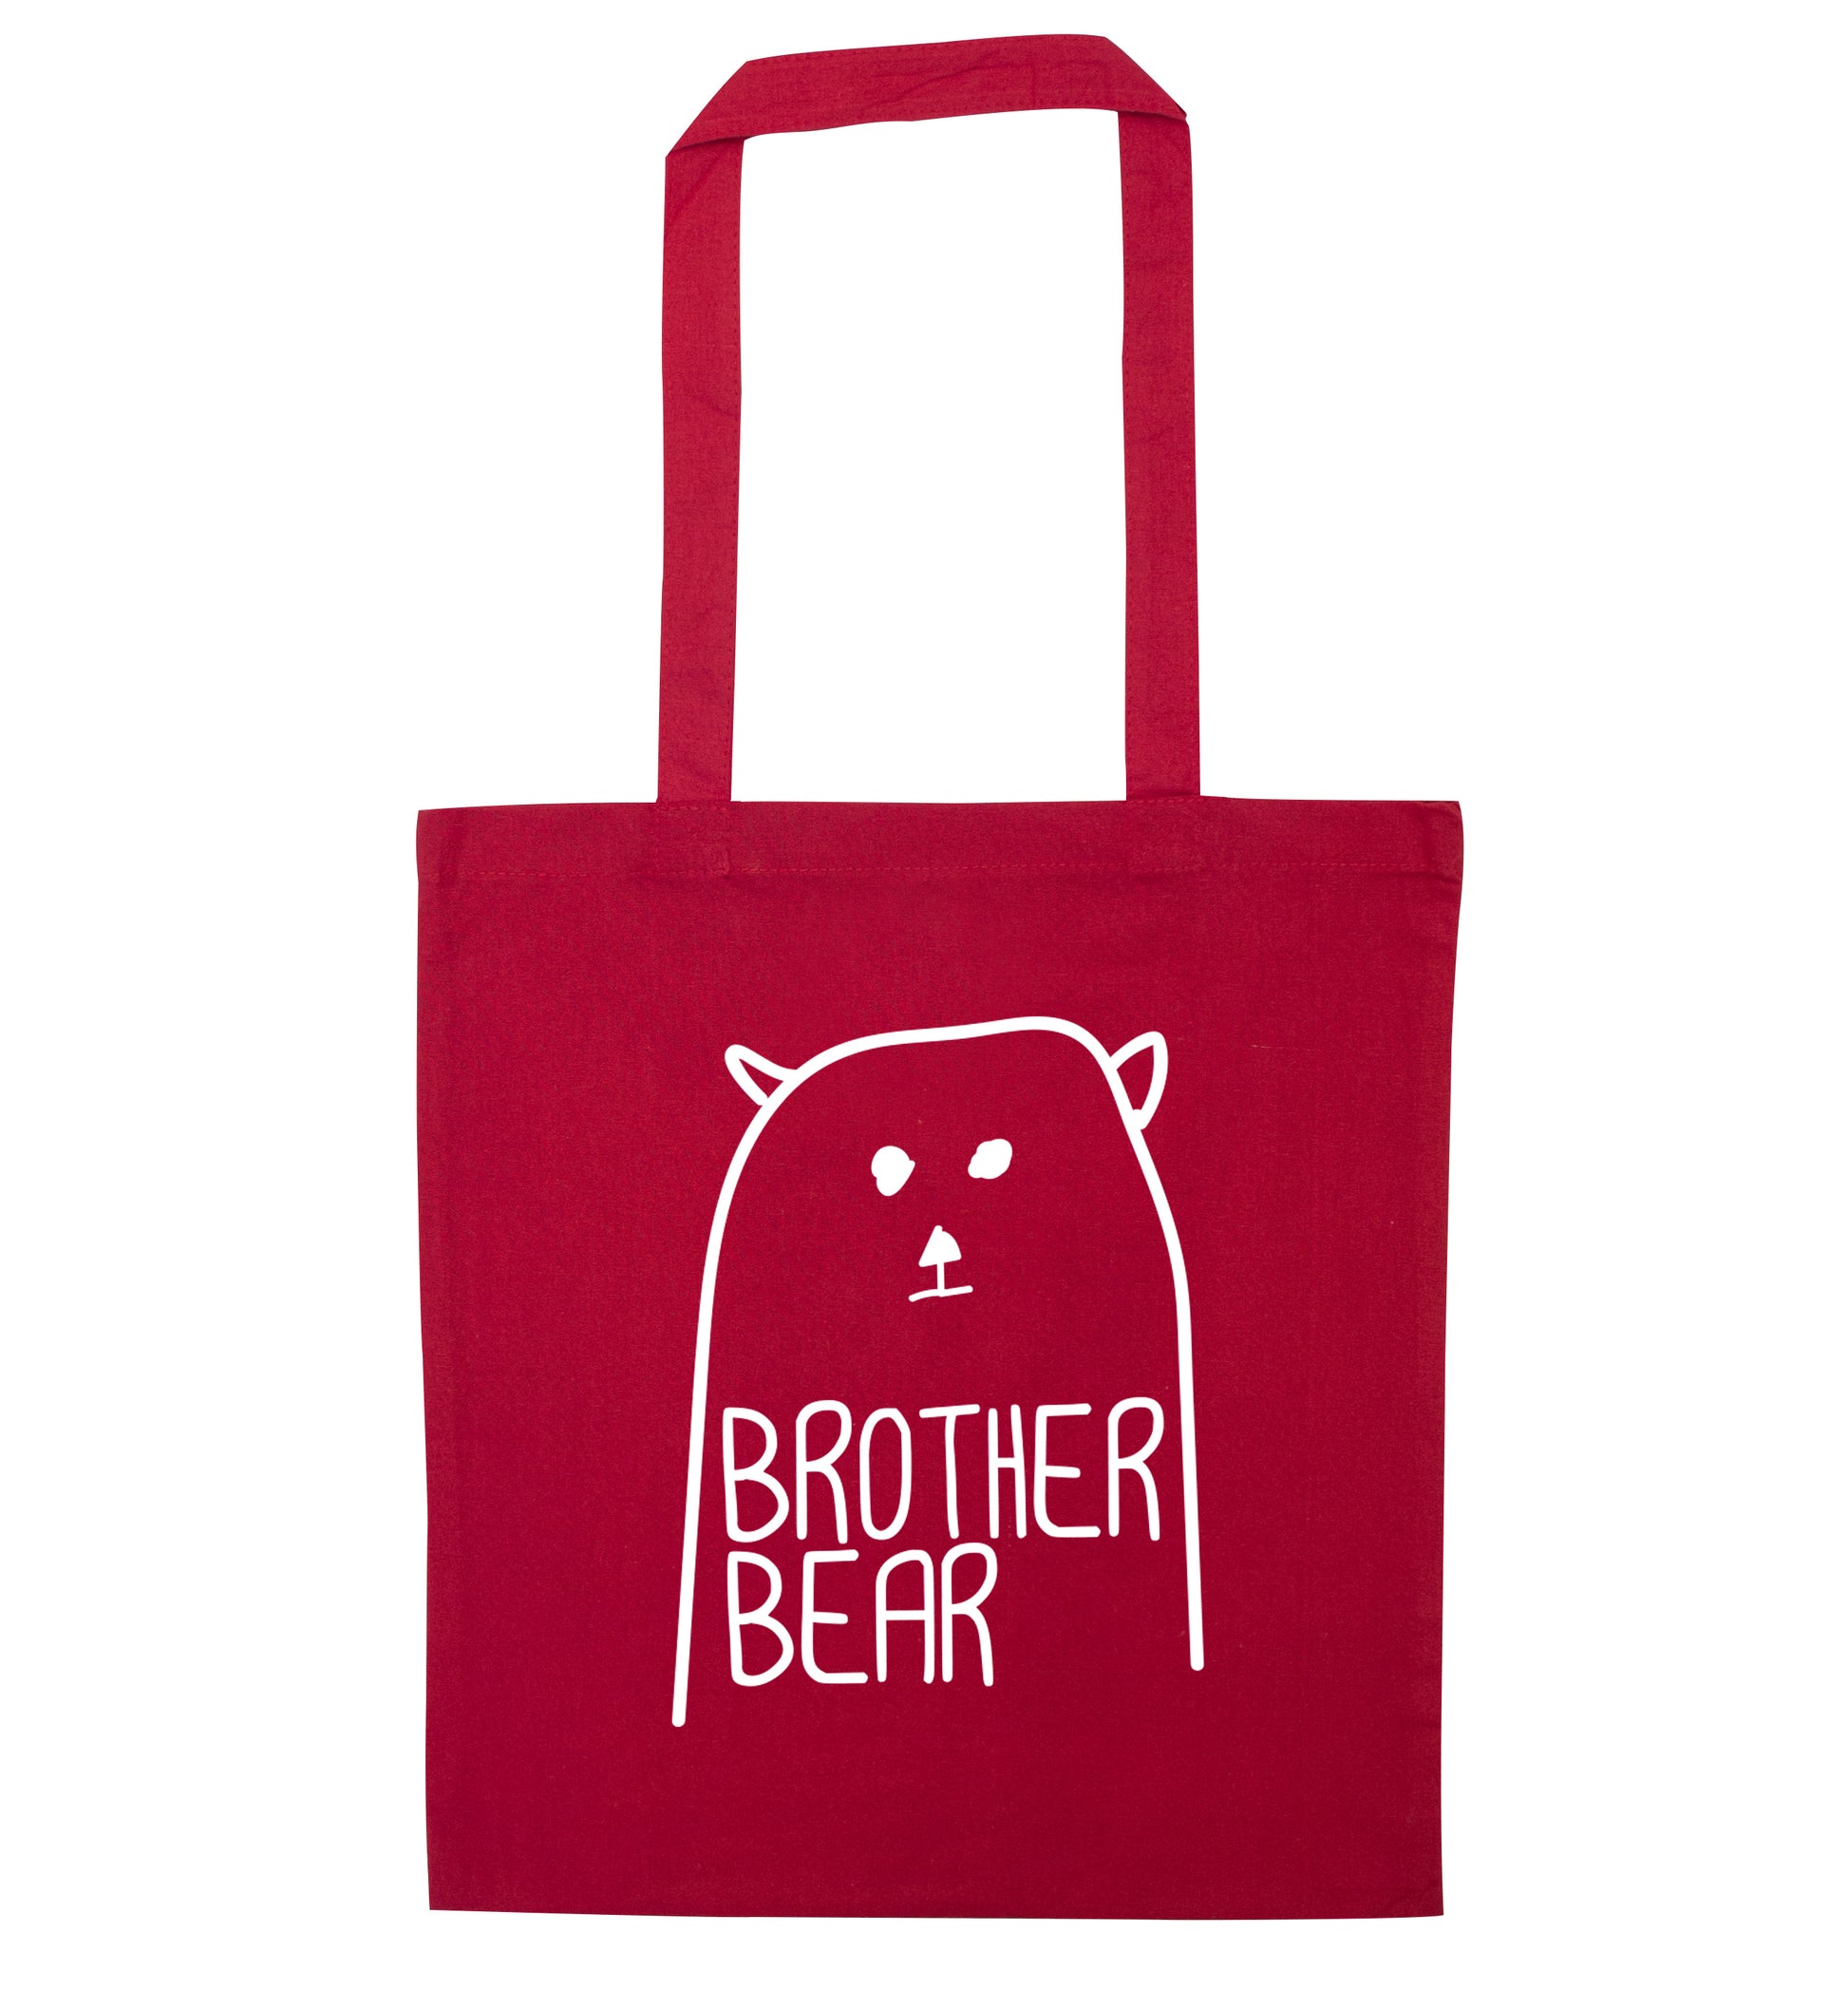 Brother bear red tote bag